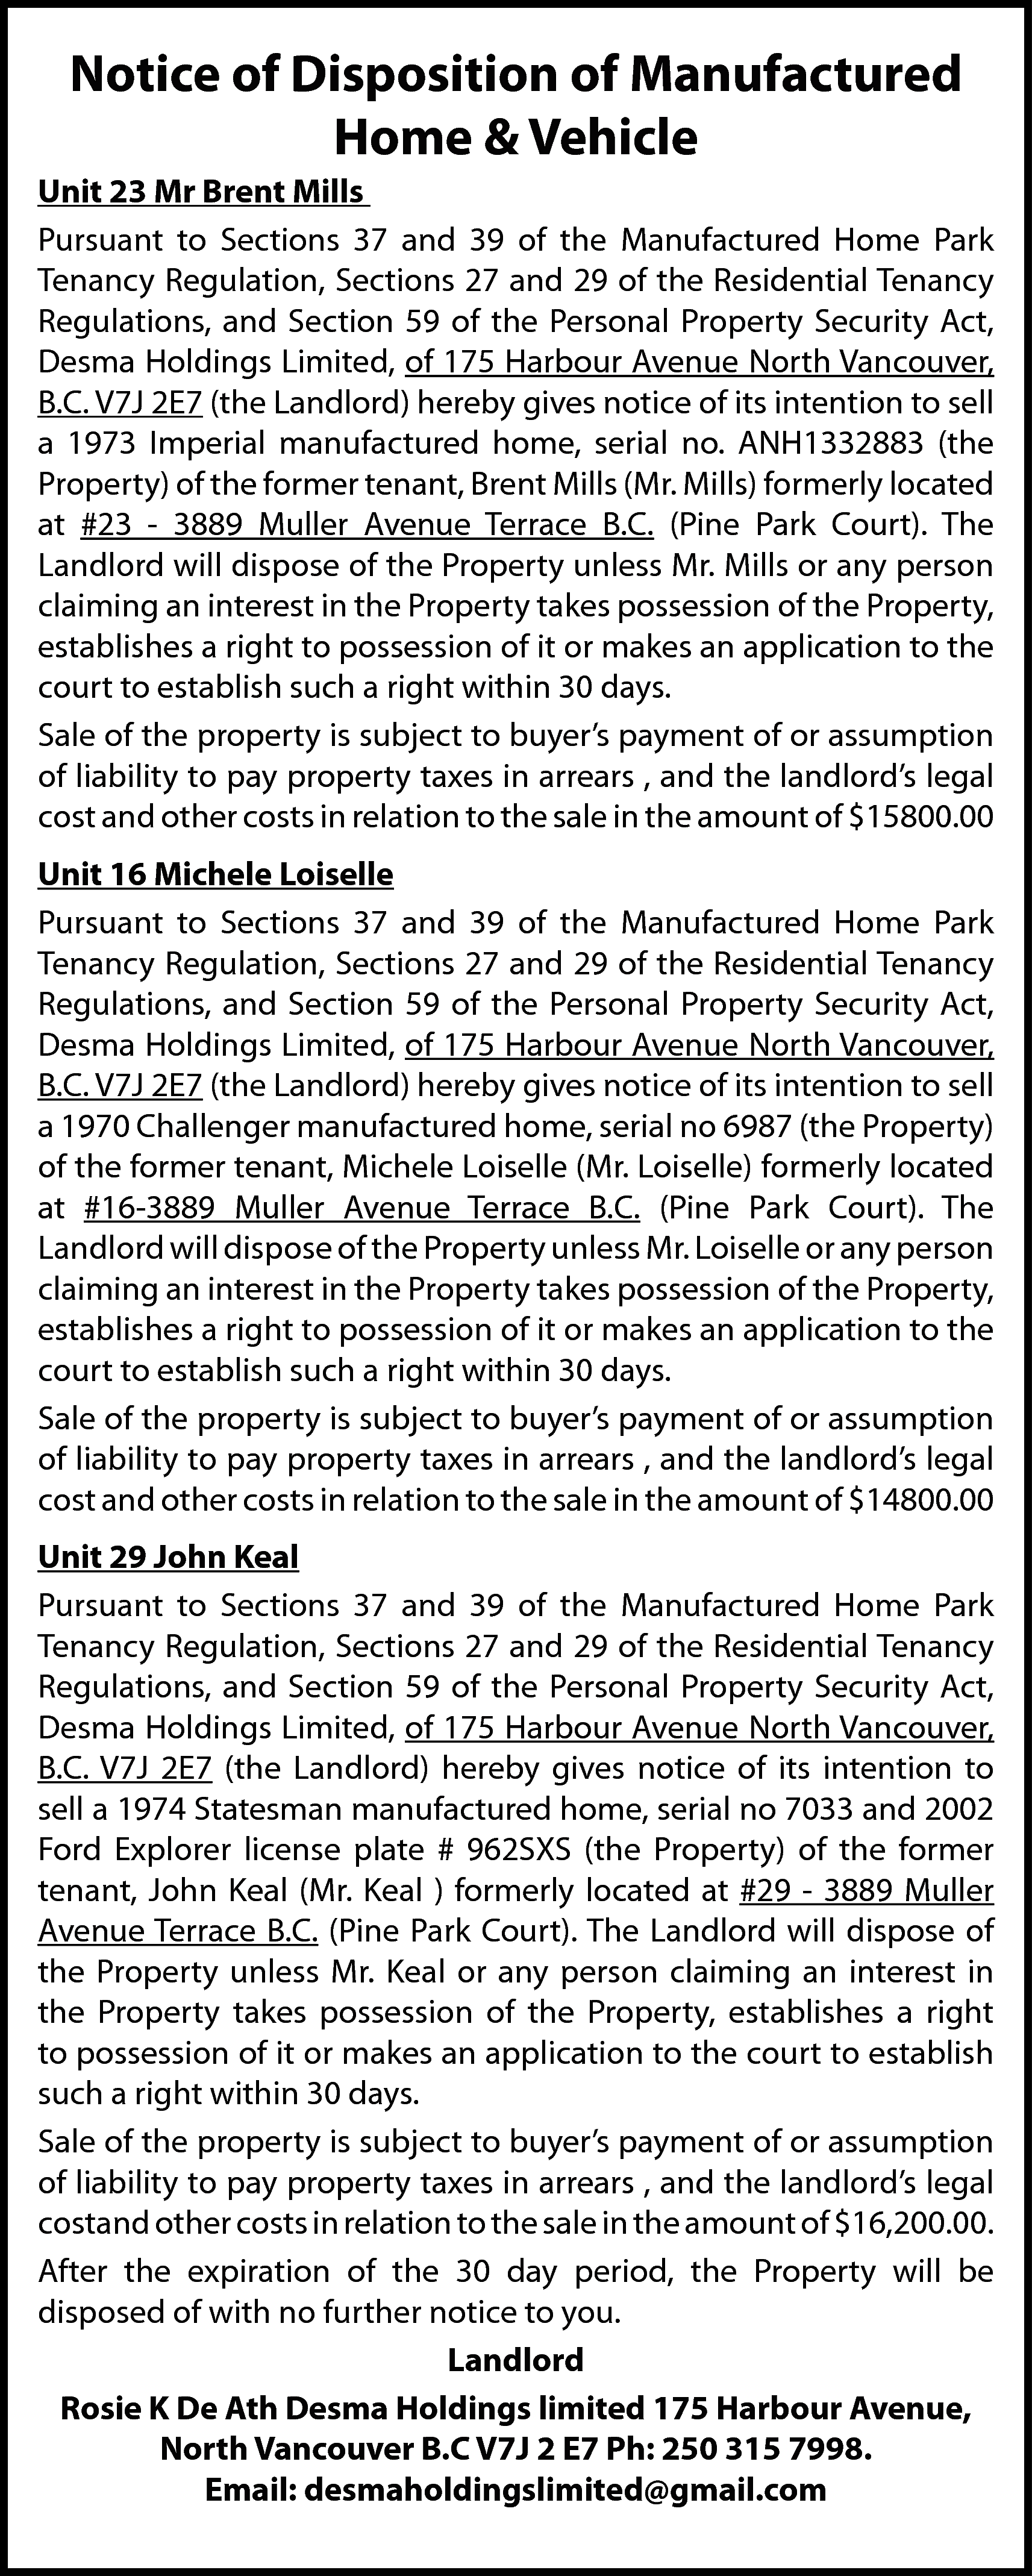 Notice of Disposition of Manufactured  Notice of Disposition of Manufactured  Home & Vehicle  Unit 23 Mr Brent Mills  Pursuant to Sections 37 and 39 of the Manufactured Home Park  Tenancy Regulation, Sections 27 and 29 of the Residential Tenancy  Regulations, and Section 59 of the Personal Property Security Act,  Desma Holdings Limited, of 175 Harbour Avenue North Vancouver,  B.C. V7J 2E7 (the Landlord) hereby gives notice of its intention to sell  a 1973 Imperial manufactured home, serial no. ANH1332883 (the  Property) of the former tenant, Brent Mills (Mr. Mills) formerly located  at #23 - 3889 Muller Avenue Terrace B.C. (Pine Park Court). The  Landlord will dispose of the Property unless Mr. Mills or any person  claiming an interest in the Property takes possession of the Property,  establishes a right to possession of it or makes an application to the  court to establish such a right within 30 days.  Sale of the property is subject to buyer’s payment of or assumption  of liability to pay property taxes in arrears , and the landlord’s legal  cost and other costs in relation to the sale in the amount of $15800.00  Unit 16 Michele Loiselle  Pursuant to Sections 37 and 39 of the Manufactured Home Park  Tenancy Regulation, Sections 27 and 29 of the Residential Tenancy  Regulations, and Section 59 of the Personal Property Security Act,  Desma Holdings Limited, of 175 Harbour Avenue North Vancouver,  B.C. V7J 2E7 (the Landlord) hereby gives notice of its intention to sell  a 1970 Challenger manufactured home, serial no 6987 (the Property)  of the former tenant, Michele Loiselle (Mr. Loiselle) formerly located  at #16-3889 Muller Avenue Terrace B.C. (Pine Park Court). The  Landlord will dispose of the Property unless Mr. Loiselle or any person  claiming an interest in the Property takes possession of the Property,  establishes a right to possession of it or makes an application to the  court to establish such a right within 30 days.  Sale of the property is subject to buyer’s payment of or assumption  of liability to pay property taxes in arrears , and the landlord’s legal  cost and other costs in relation to the sale in the amount of $14800.00  Unit 29 John Keal  Pursuant to Sections 37 and 39 of the Manufactured Home Park  Tenancy Regulation, Sections 27 and 29 of the Residential Tenancy  Regulations, and Section 59 of the Personal Property Security Act,  Desma Holdings Limited, of 175 Harbour Avenue North Vancouver,  B.C. V7J 2E7 (the Landlord) hereby gives notice of its intention to  sell a 1974 Statesman manufactured home, serial no 7033 and 2002  Ford Explorer license plate # 962SXS (the Property) of the former  tenant, John Keal (Mr. Keal ) formerly located at #29 - 3889 Muller  Avenue Terrace B.C. (Pine Park Court). The Landlord will dispose of  the Property unless Mr. Keal or any person claiming an interest in  the Property takes possession of the Property, establishes a right  to possession of it or makes an application to the court to establish  such a right within 30 days.  Sale of the property is subject to buyer’s payment of or assumption  of liability to pay property taxes in arrears , and the landlord’s legal  costand other costs in relation to the sale in the amount of $16,200.00.  After the expiration of the 30 day period, the Property will be  disposed of with no further notice to you.  Landlord  Rosie K De Ath Desma Holdings limited 175 Harbour Avenue,  North Vancouver B.C V7J 2 E7 Ph: 250 315 7998.  Email: desmaholdingslimited@gmail.com    